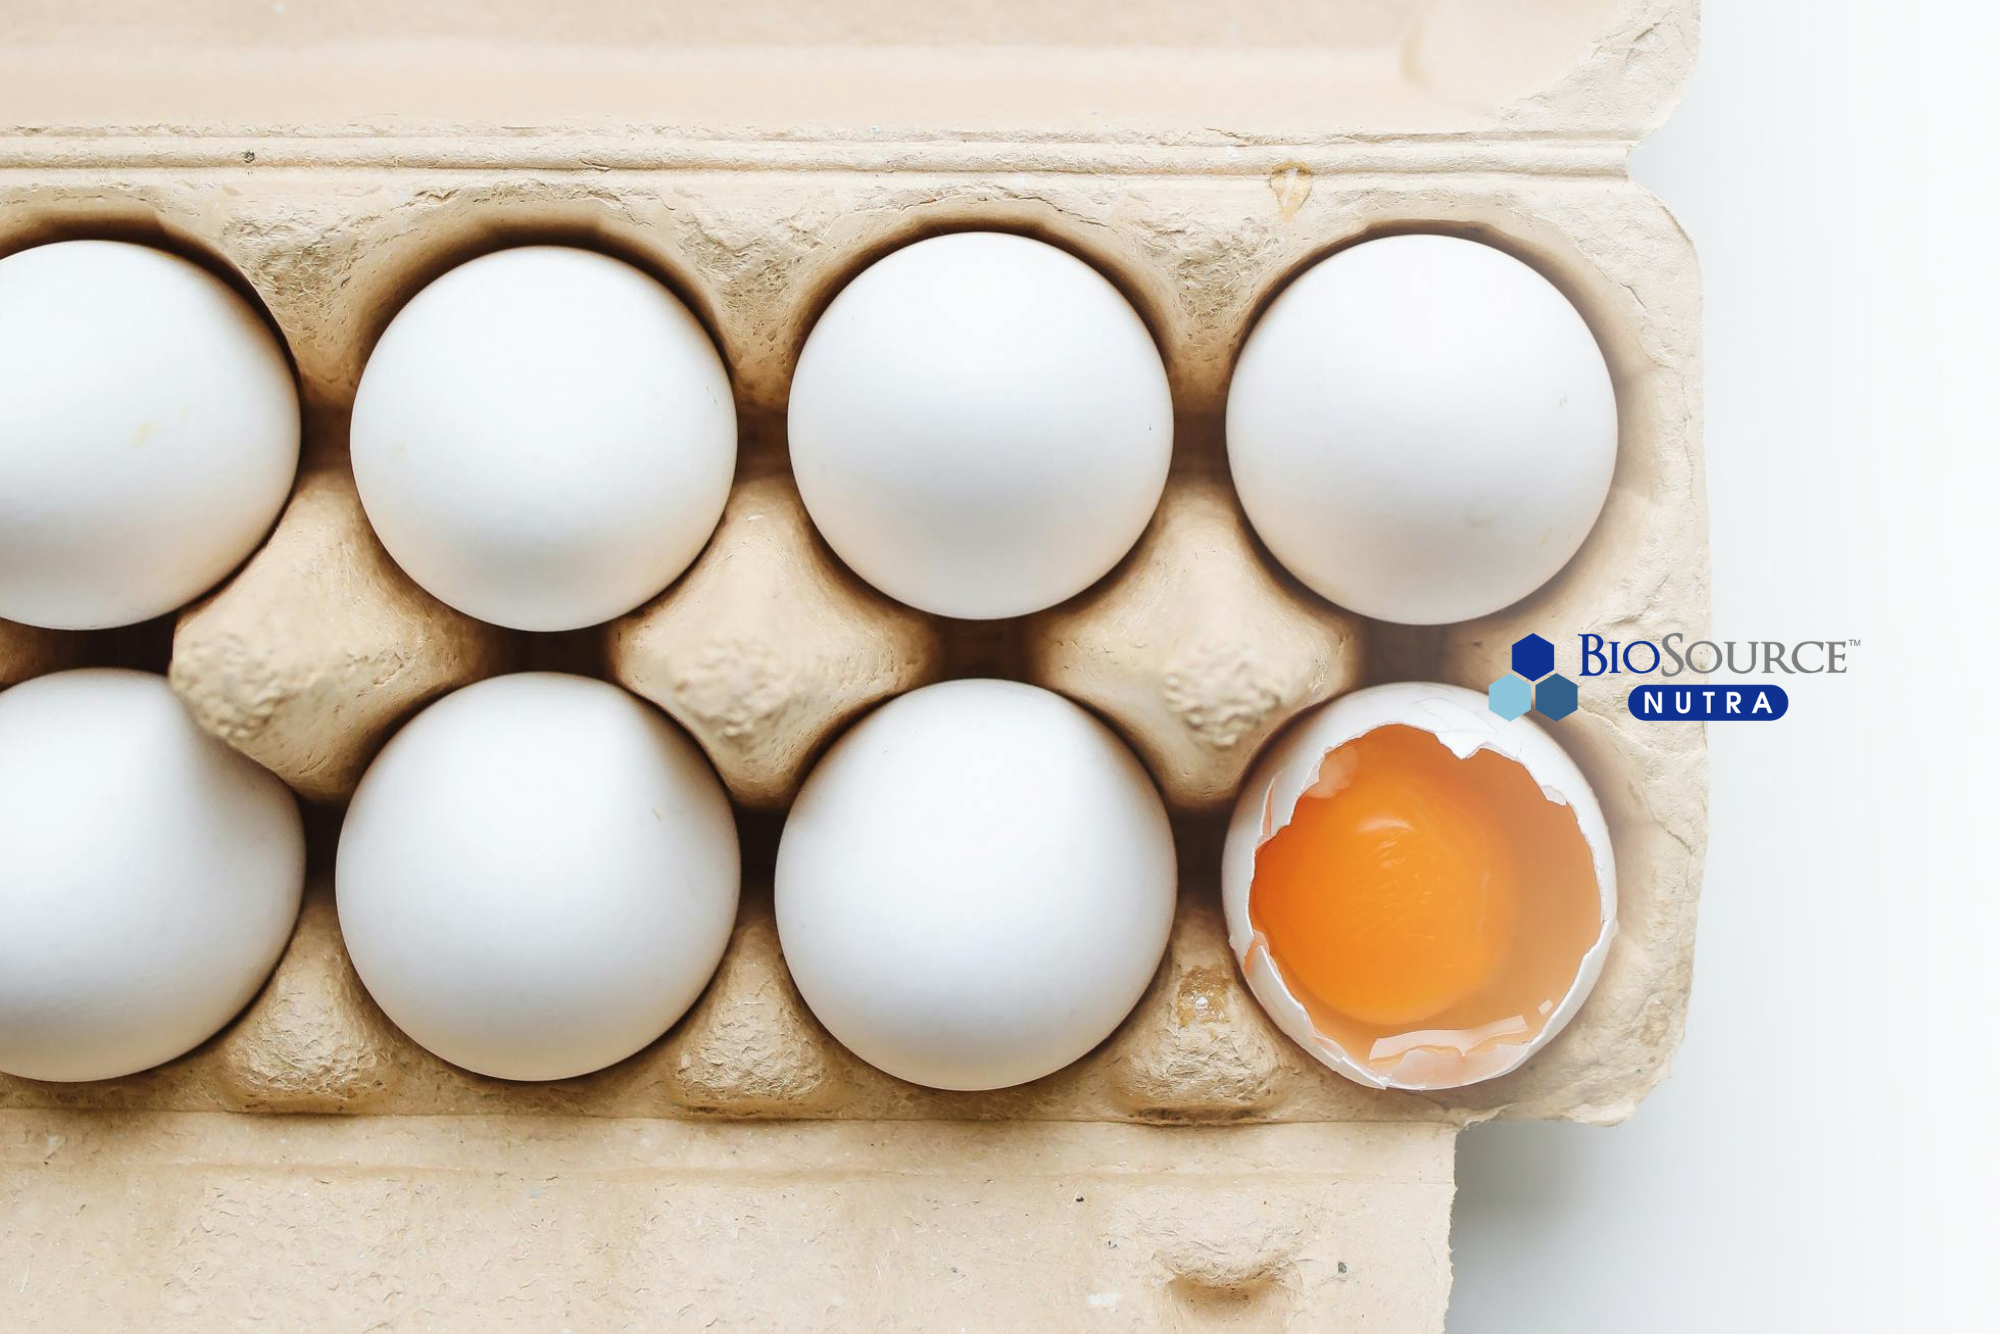 A carton of eggs, with one egg showing the yolk and whites